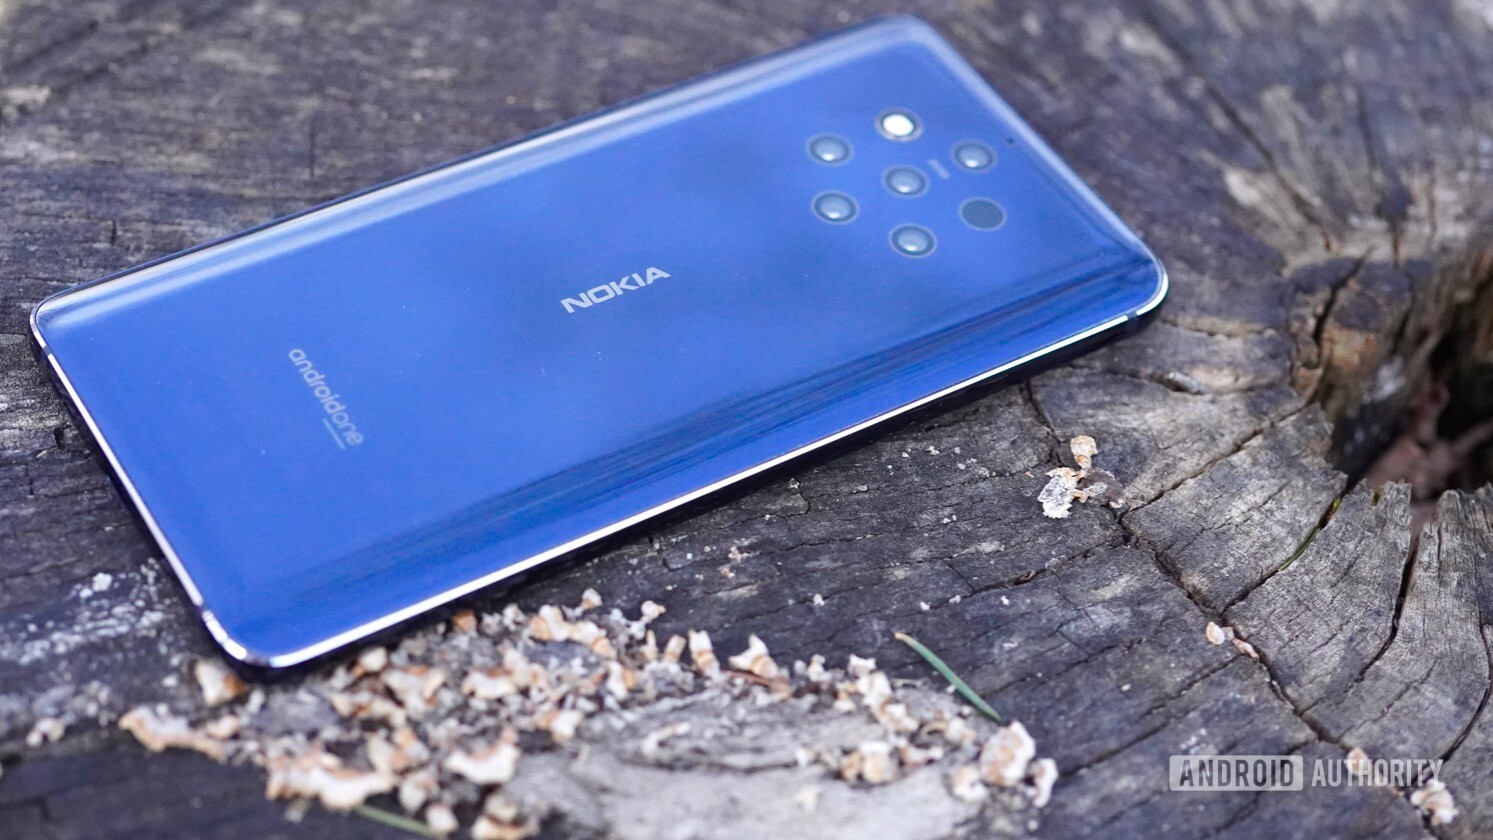 Best Nokia Phones What Are Your Options January 2020